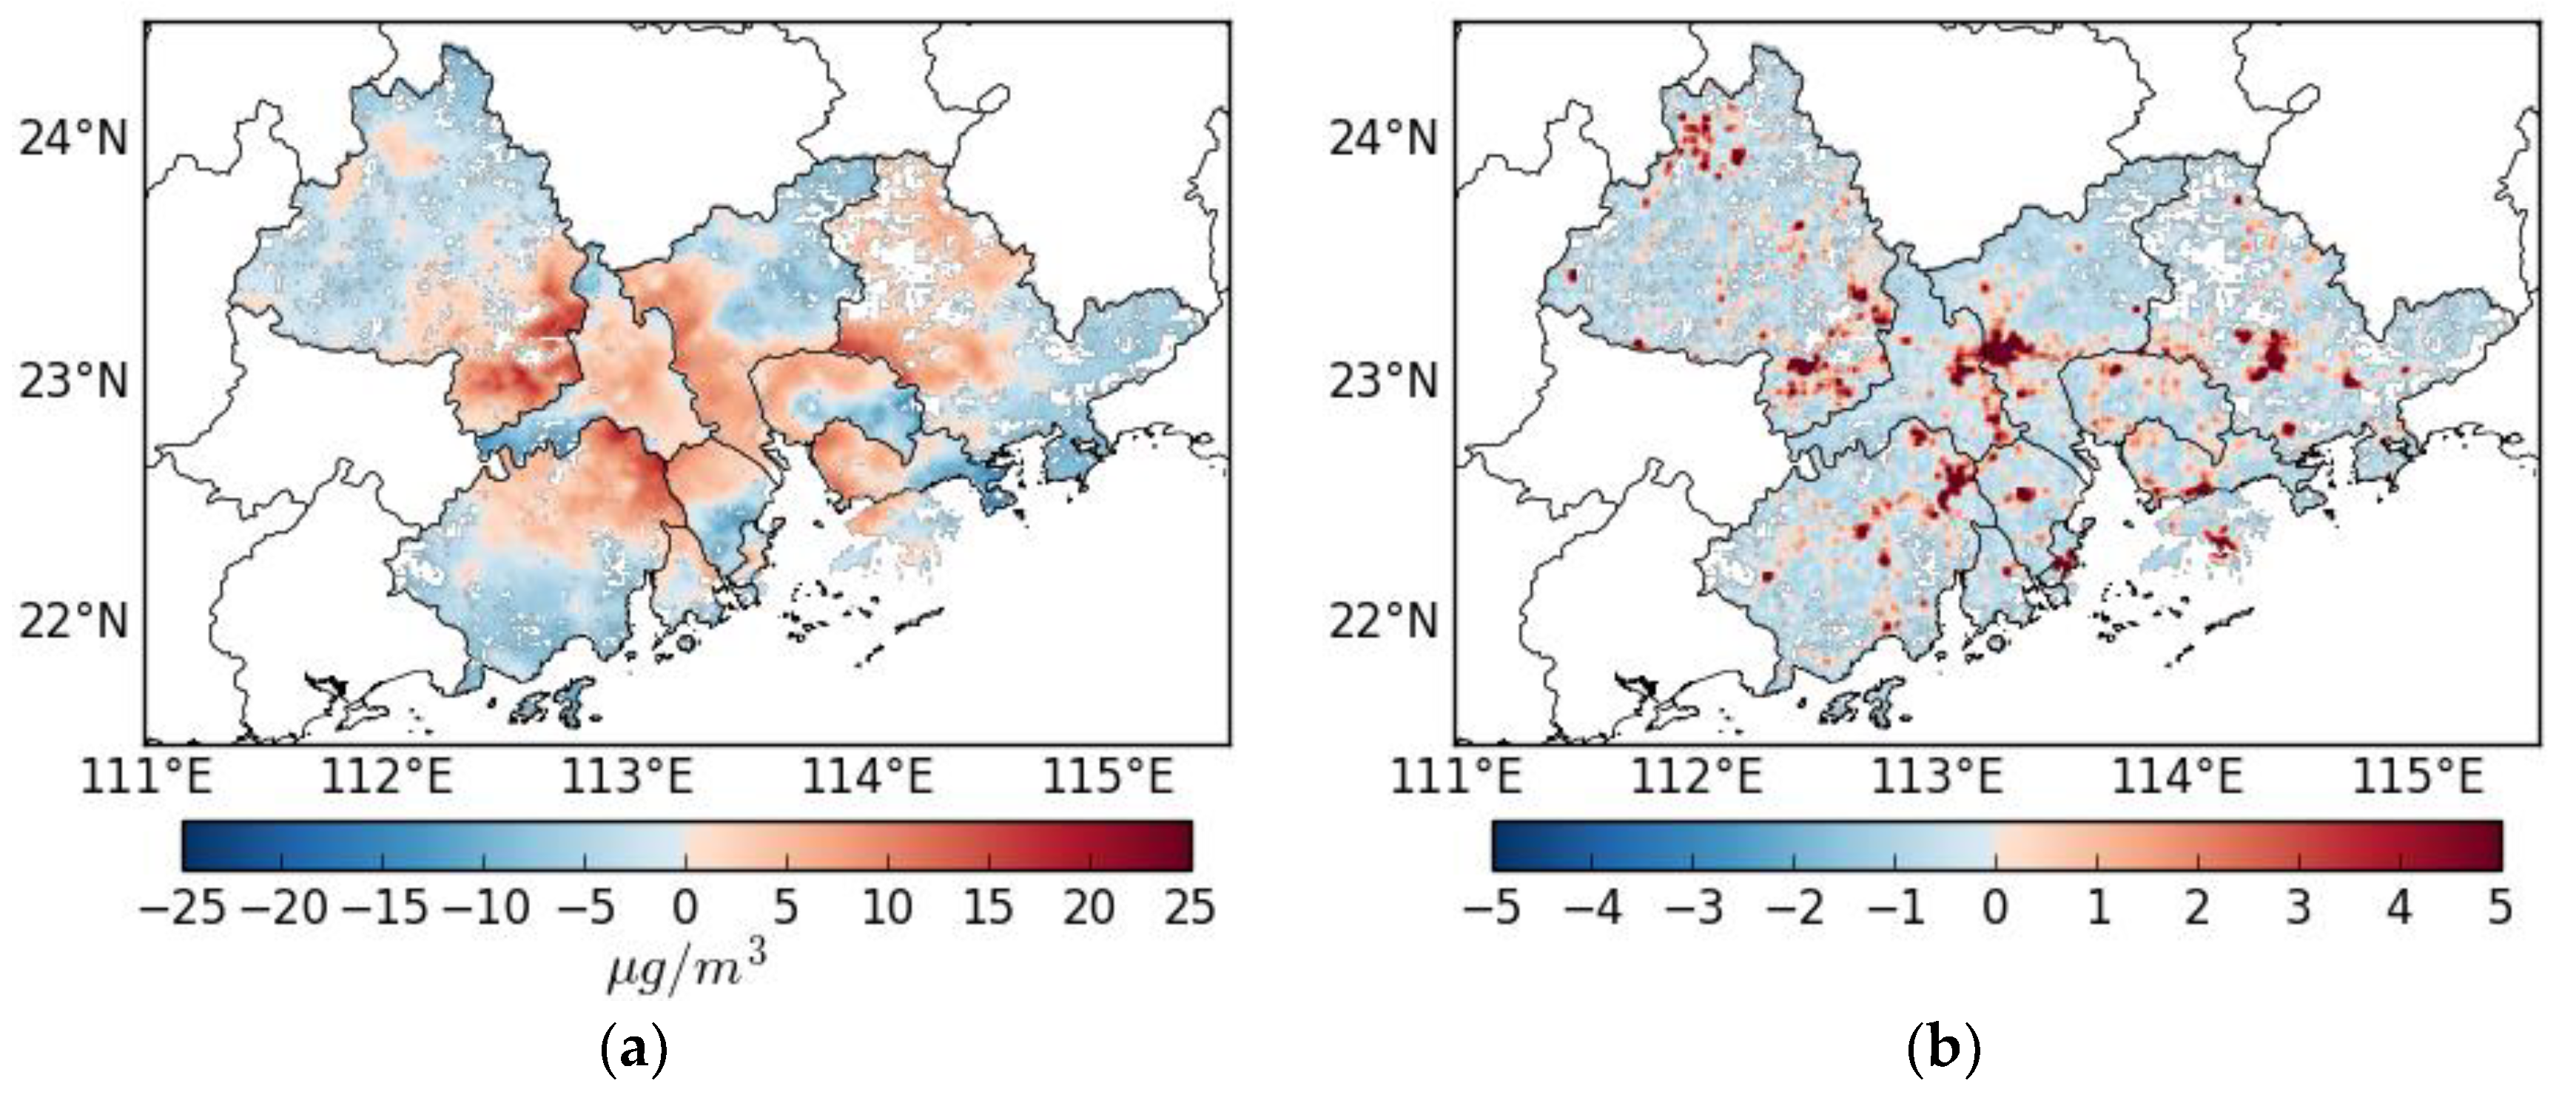 Remote Sensing | Free Full-Text | Decomposing the Long-term Variation in  Population Exposure to Outdoor  in the Greater Bay Area of China Using  Satellite Observations